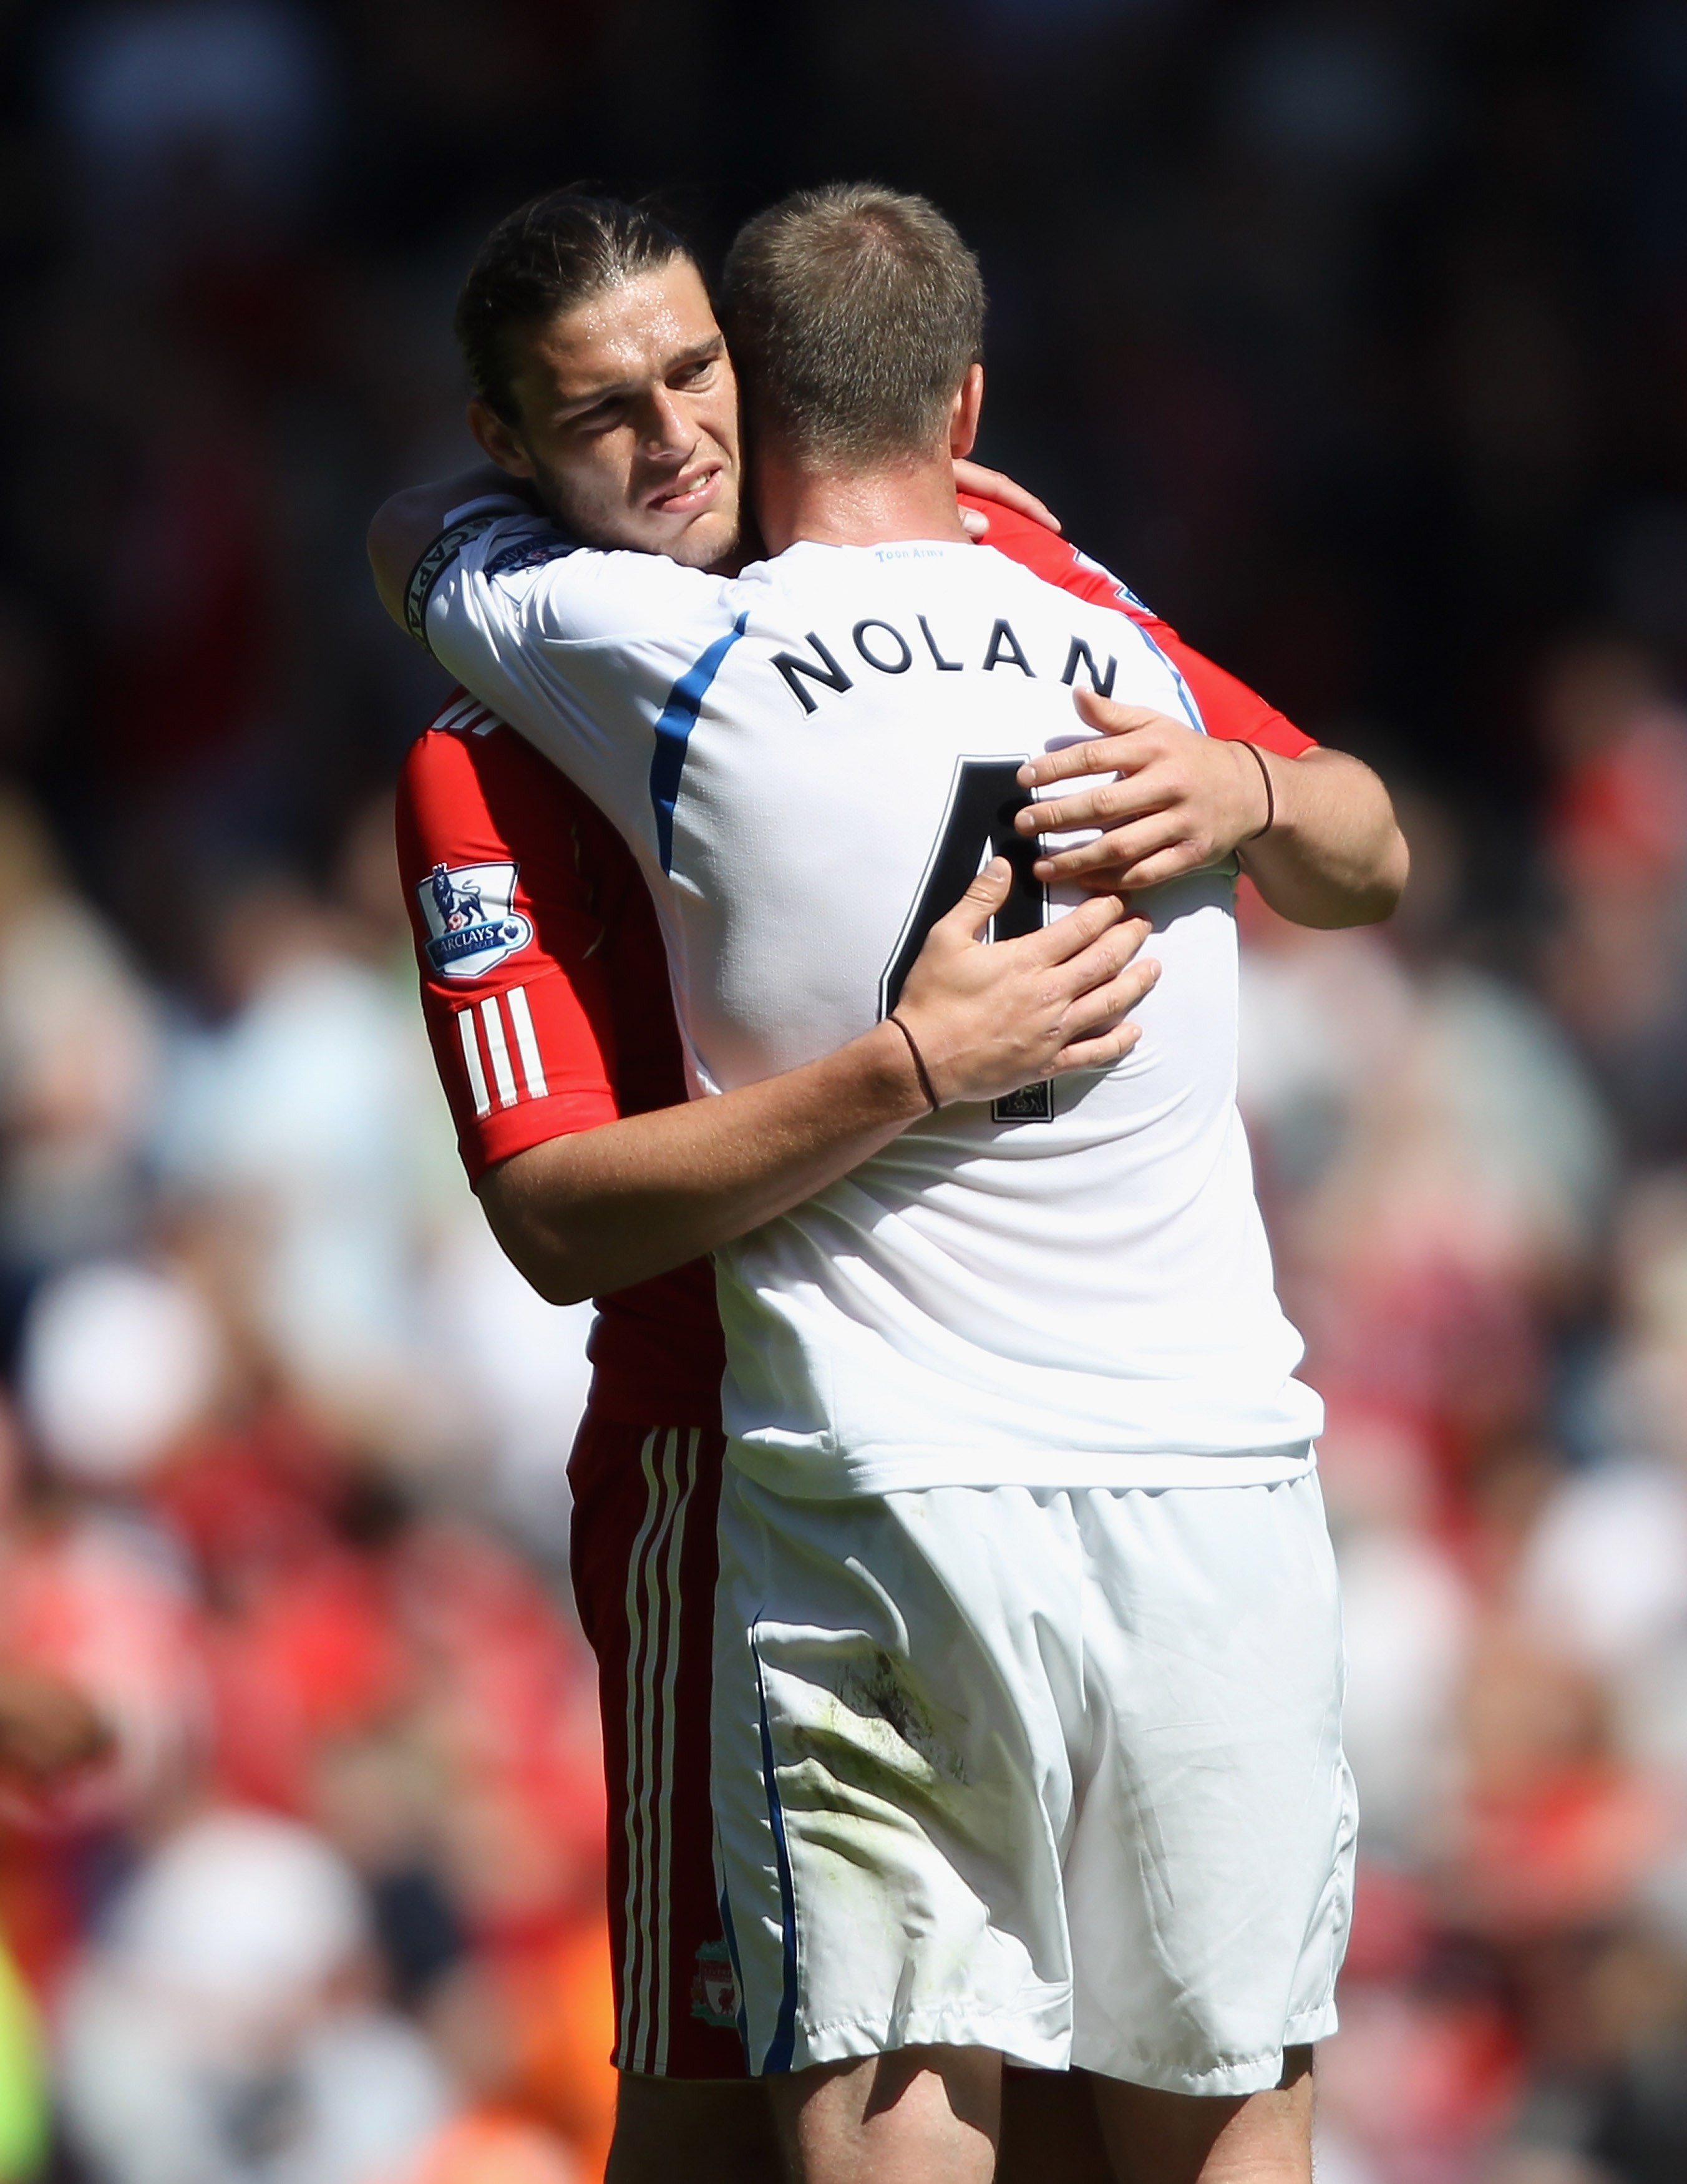 LIVERPOOL, ENGLAND - MAY 01:  Andy Carroll of Liverpool hugs Kevin Nolan of Newcastle United at the final whistle of the Barclays Premier League match between Liverpool  and Newcastle United at Anfield on May 1, 2011 in Liverpool, England.  (Photo by Cliv